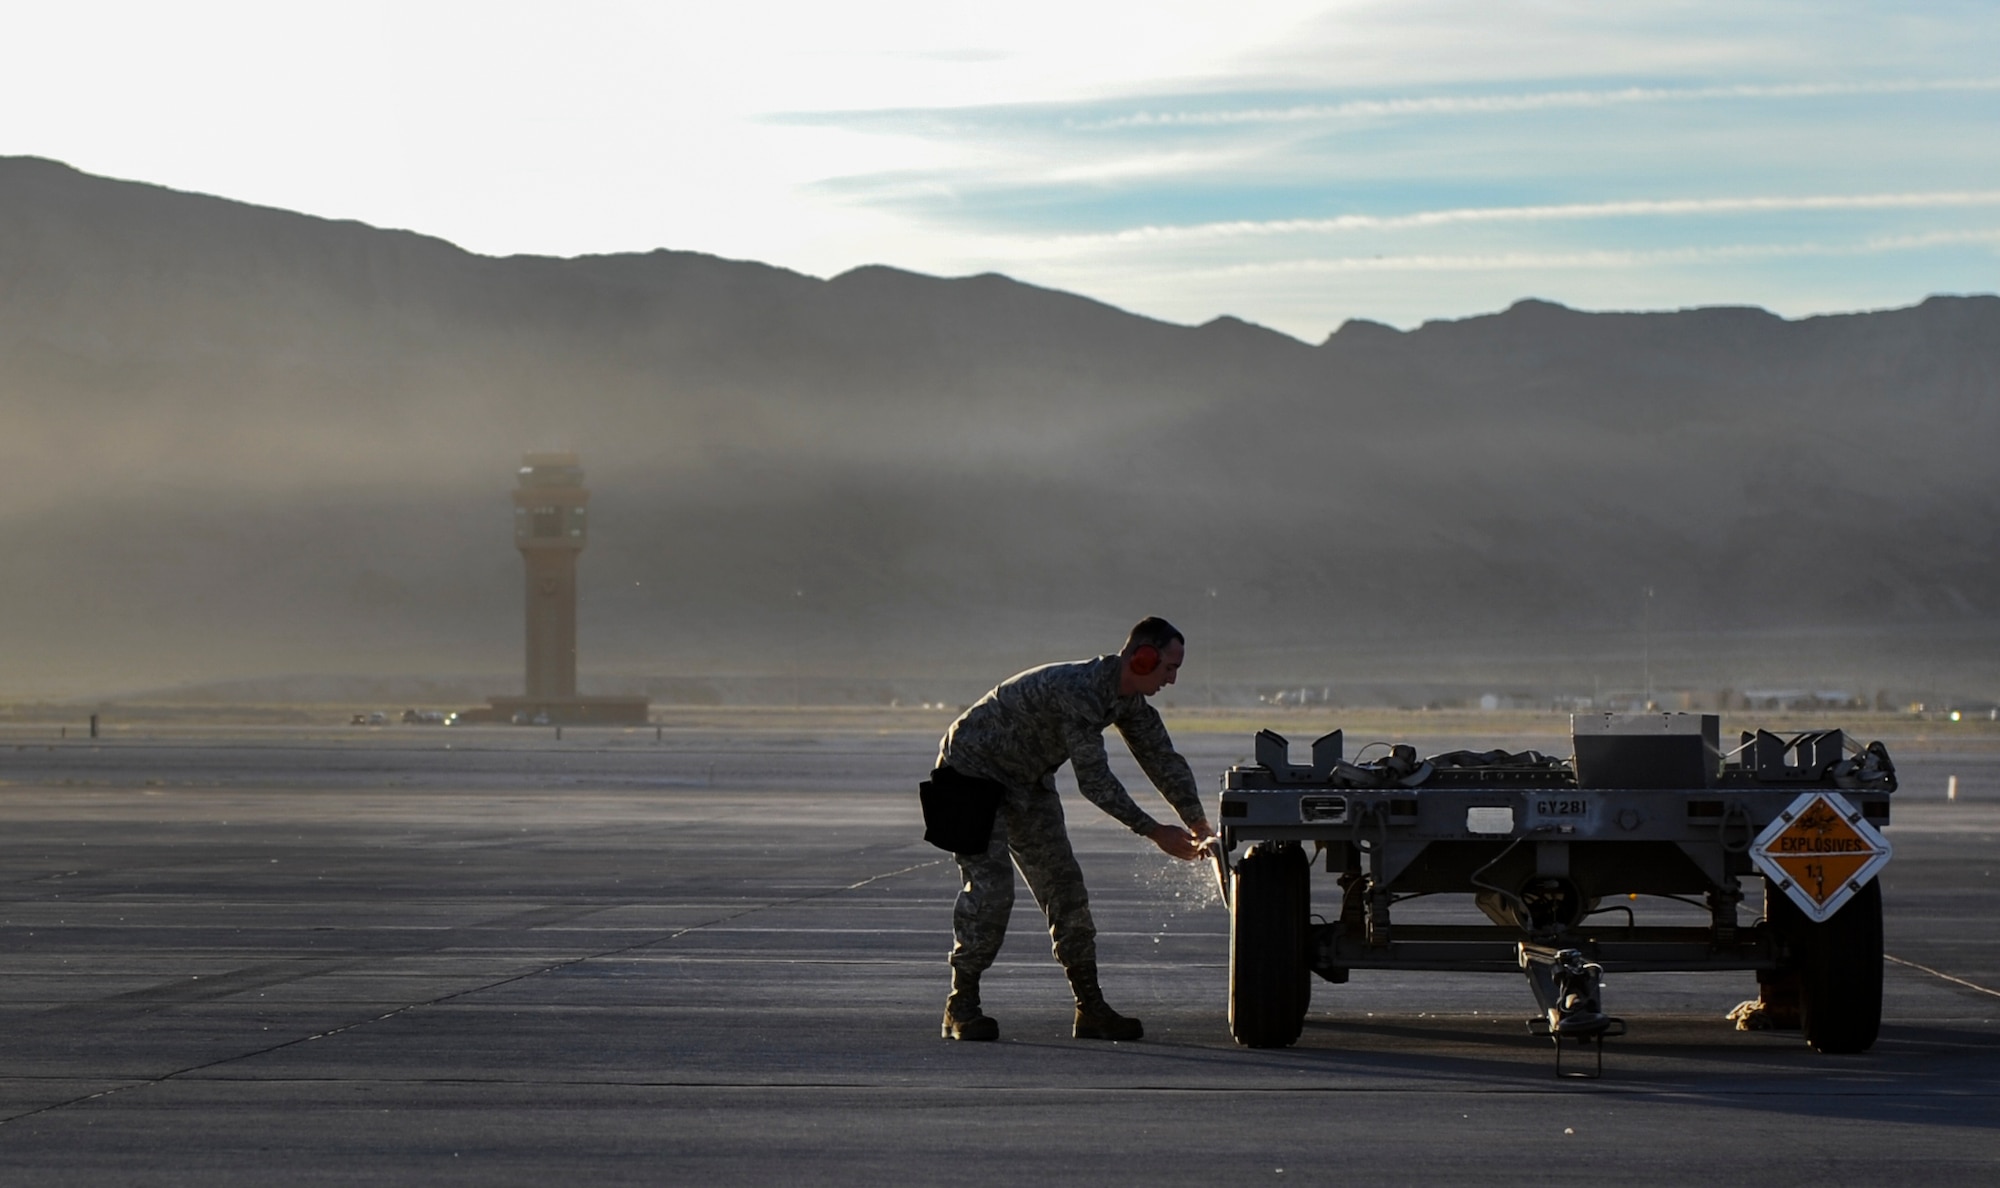 An Airman from the 757th Aircraft Maintenance Squadron secures a weapons cart during the 57th Wing’s third quarter weapons load crew competition at Nellis Air Force Base, Nev., Oct. 7. During the competition, load crew members are evaluated on a written test, dress and appearance inspection, composite tool kit  inspection, and the weapons load. (U.S. Air Force photo by Airman 1st Class Kevin Tanenbaum/Released)